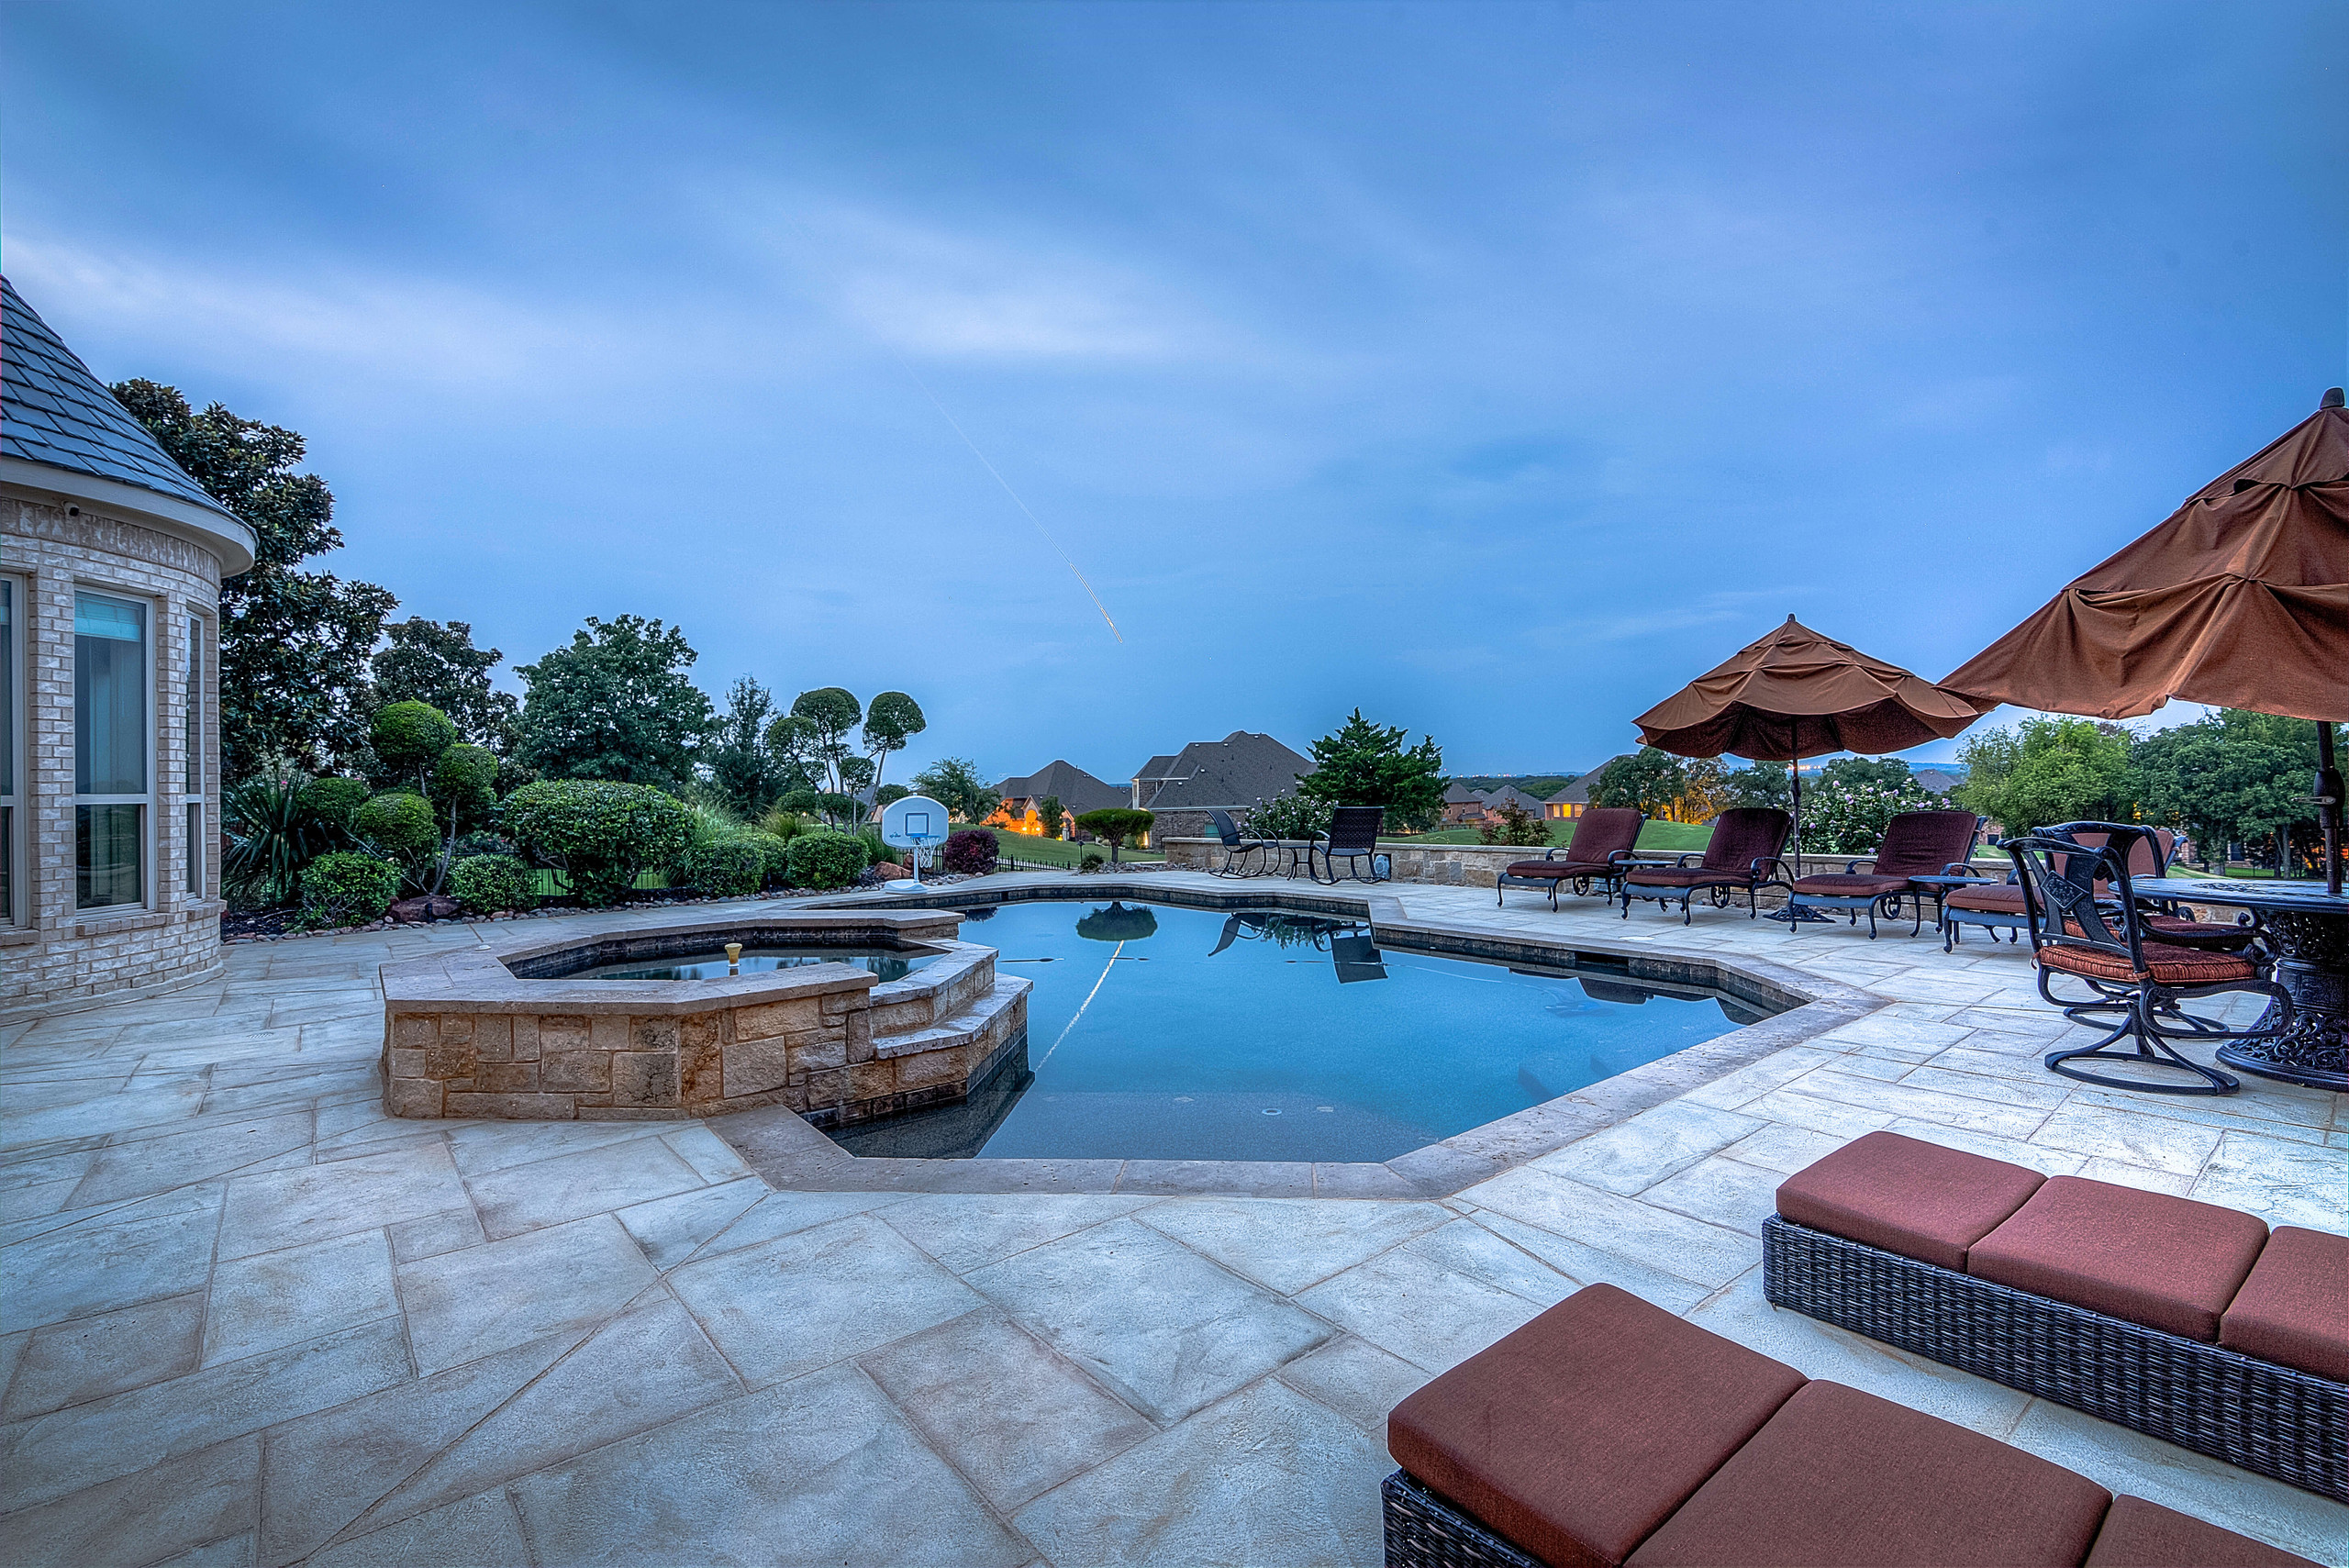 Concrete overlay product in Dallas Texas Carvestone hand-troweled pool deck